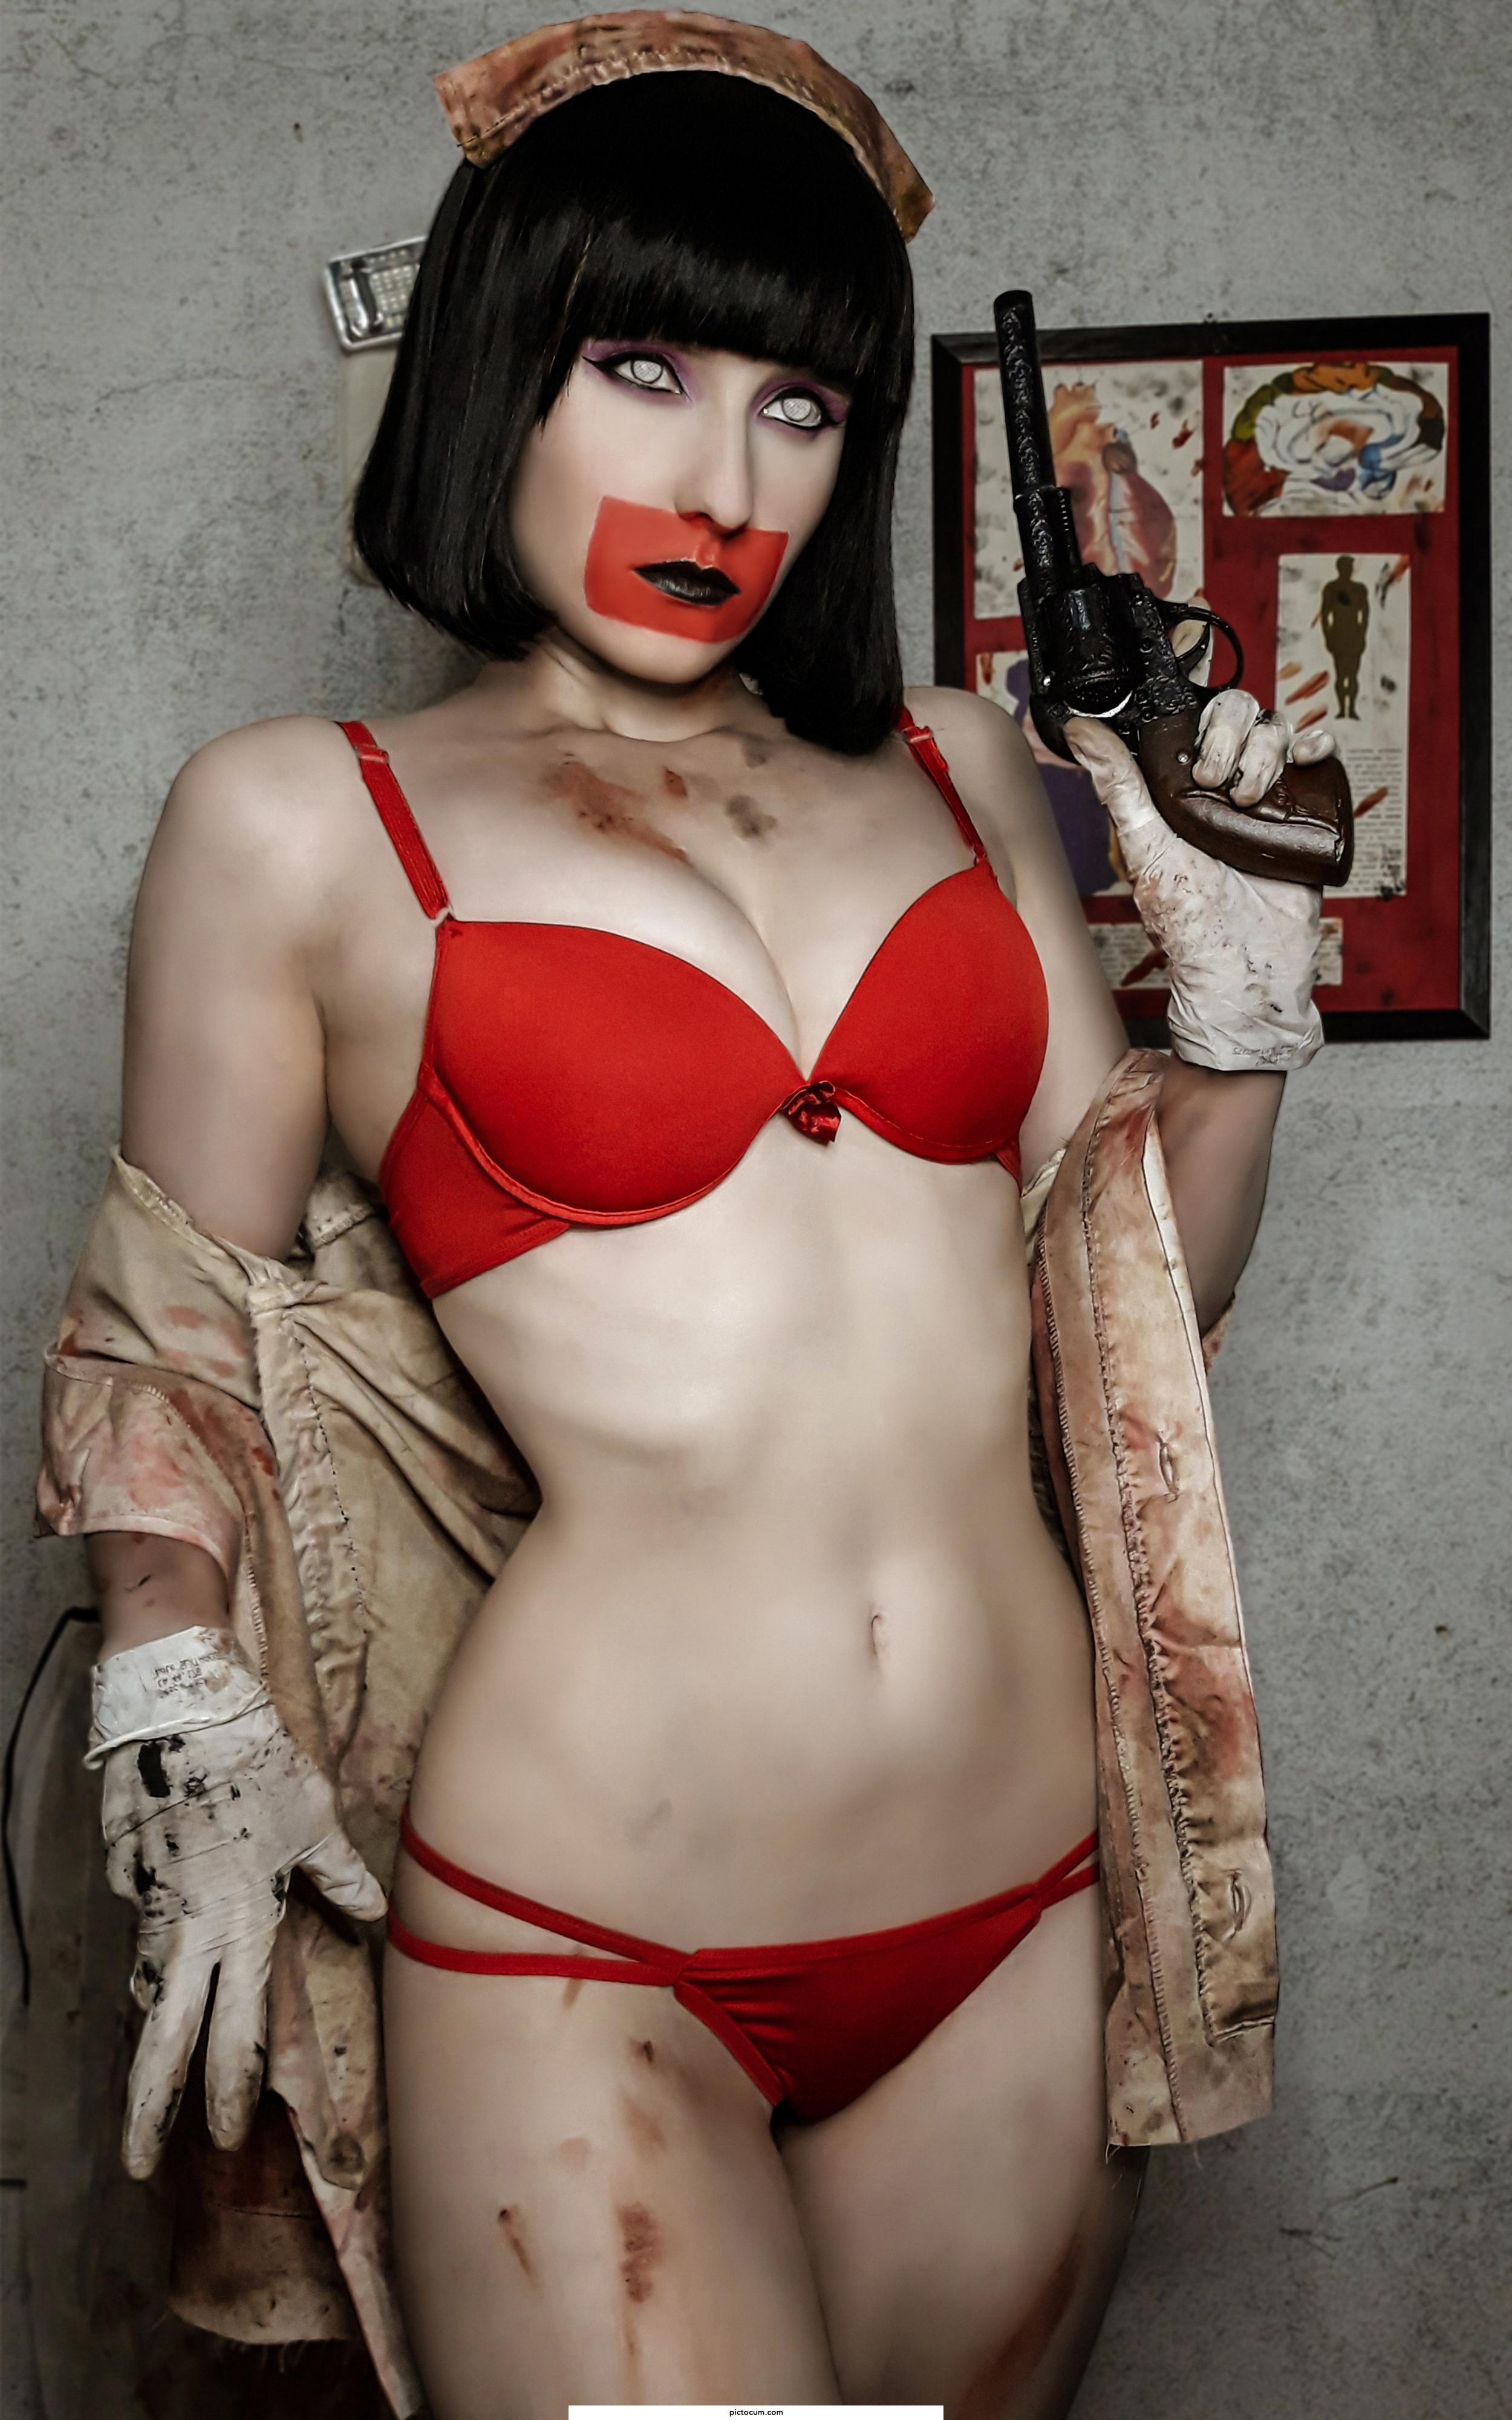 Nurse from Silent Hill 3